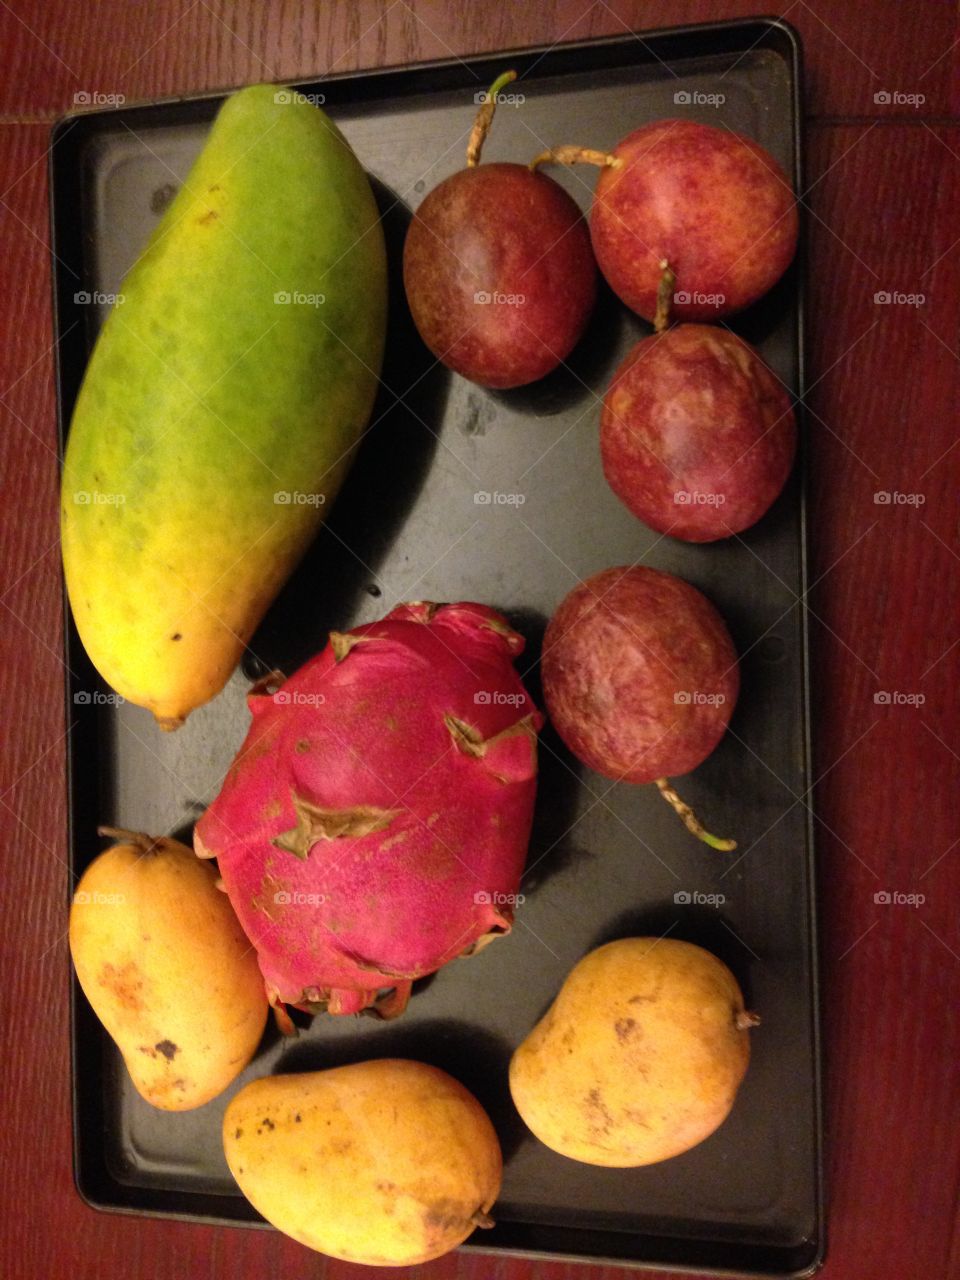 A selection of tropical fruits: mangos, dragon fruit, passion fruit. Bought on a evening market in south China.